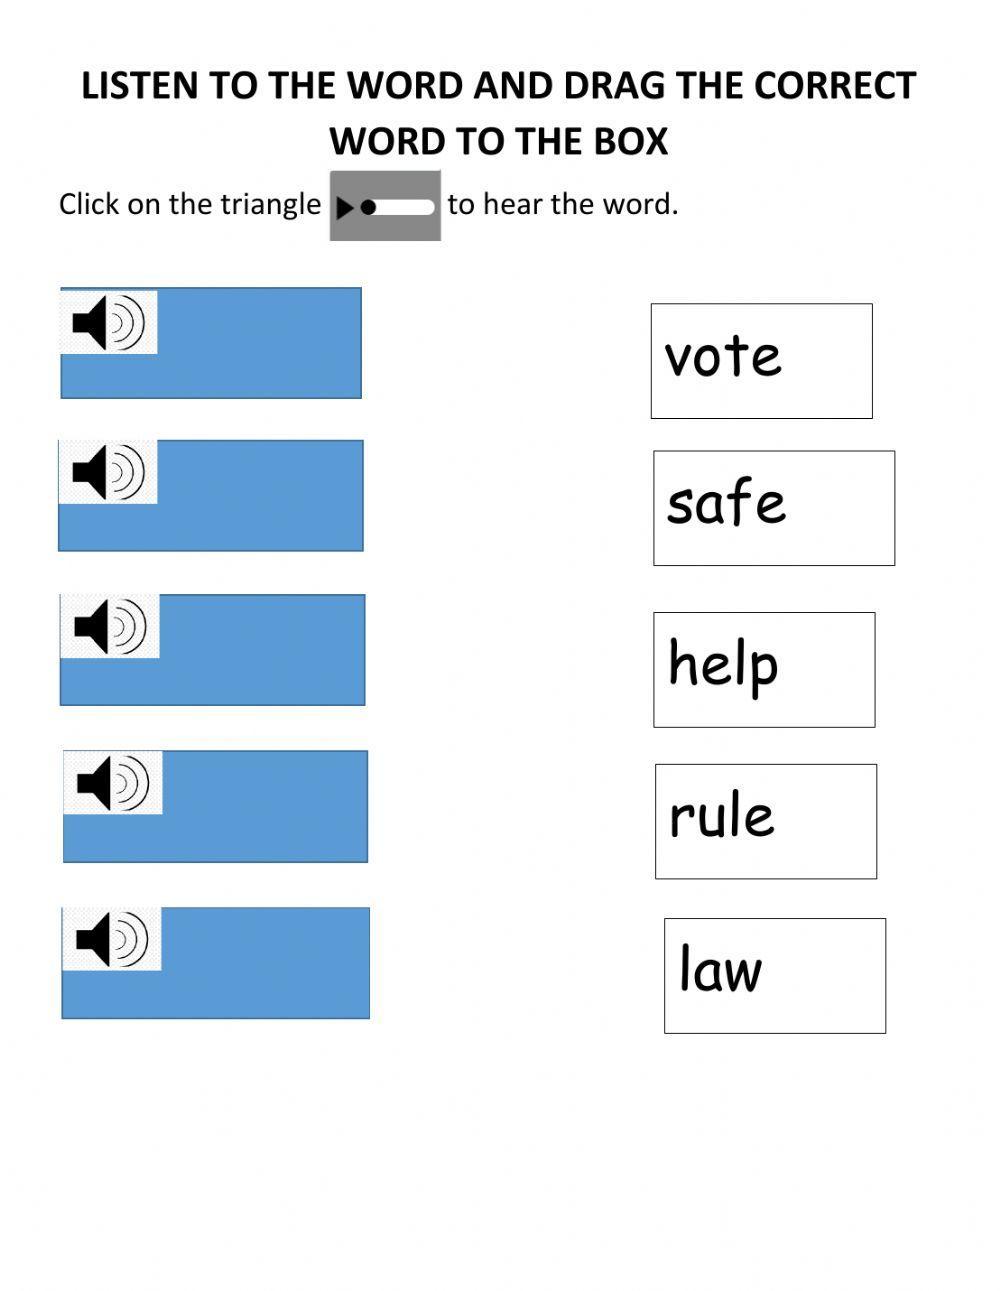 Laws and Rules Vocabulary